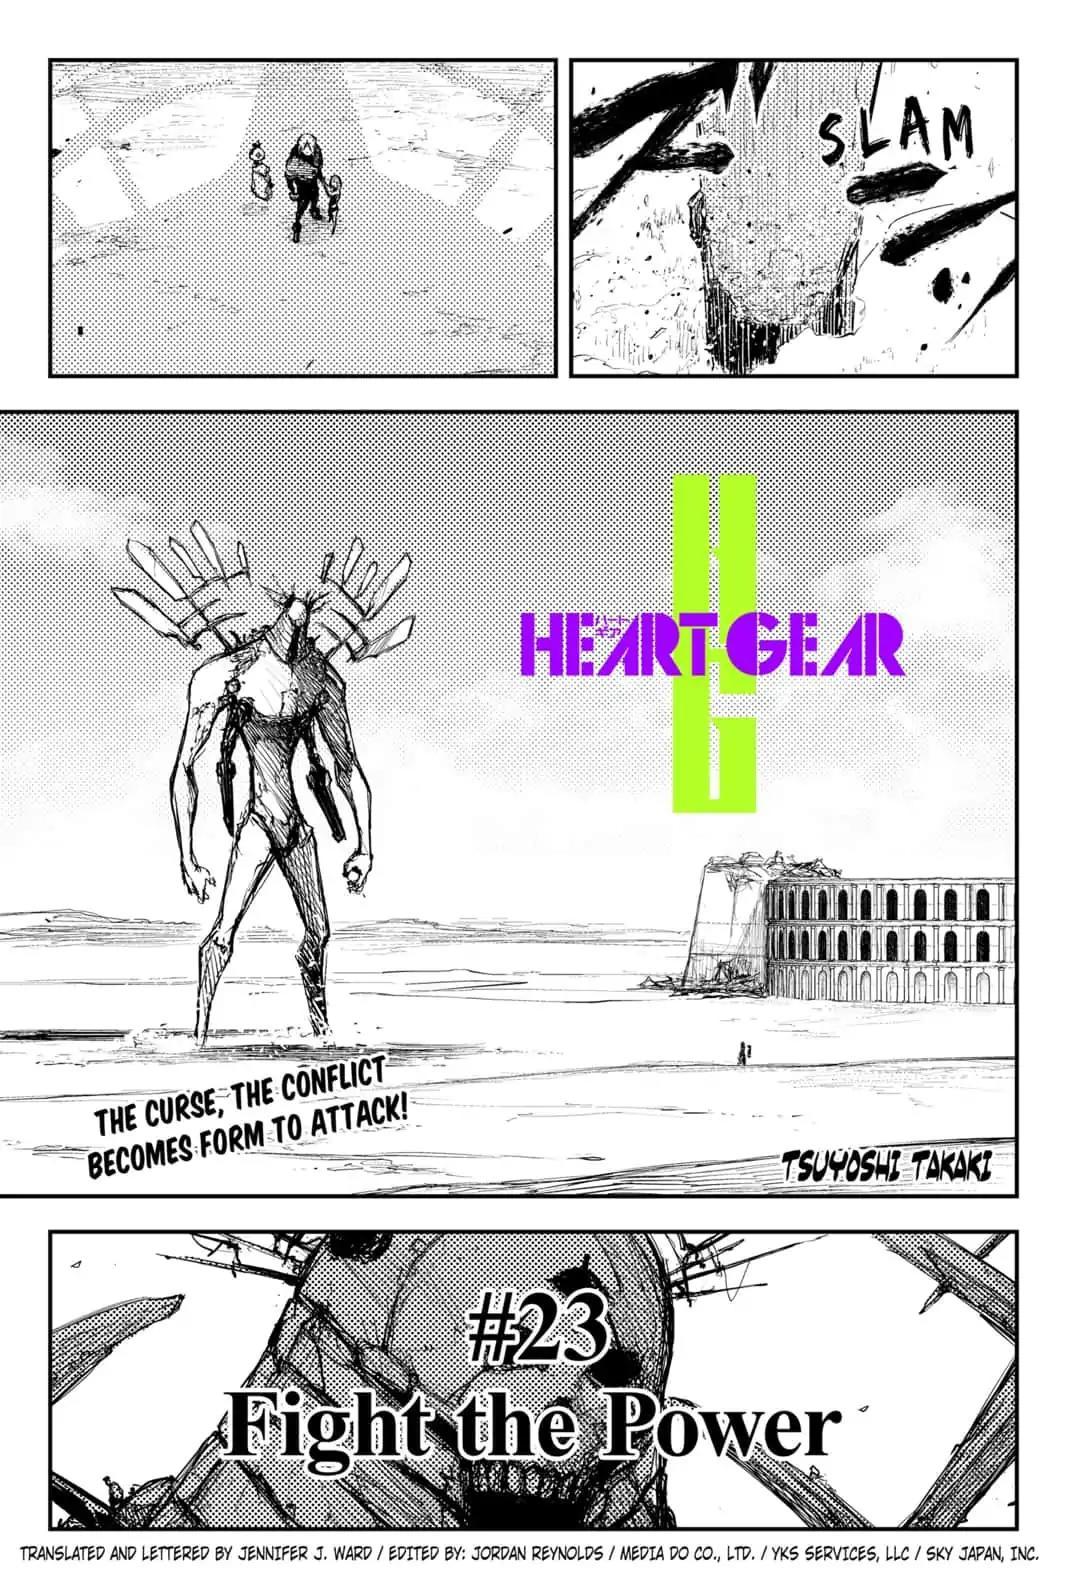 Heart Gear #23 Fight The Power - Picture 1